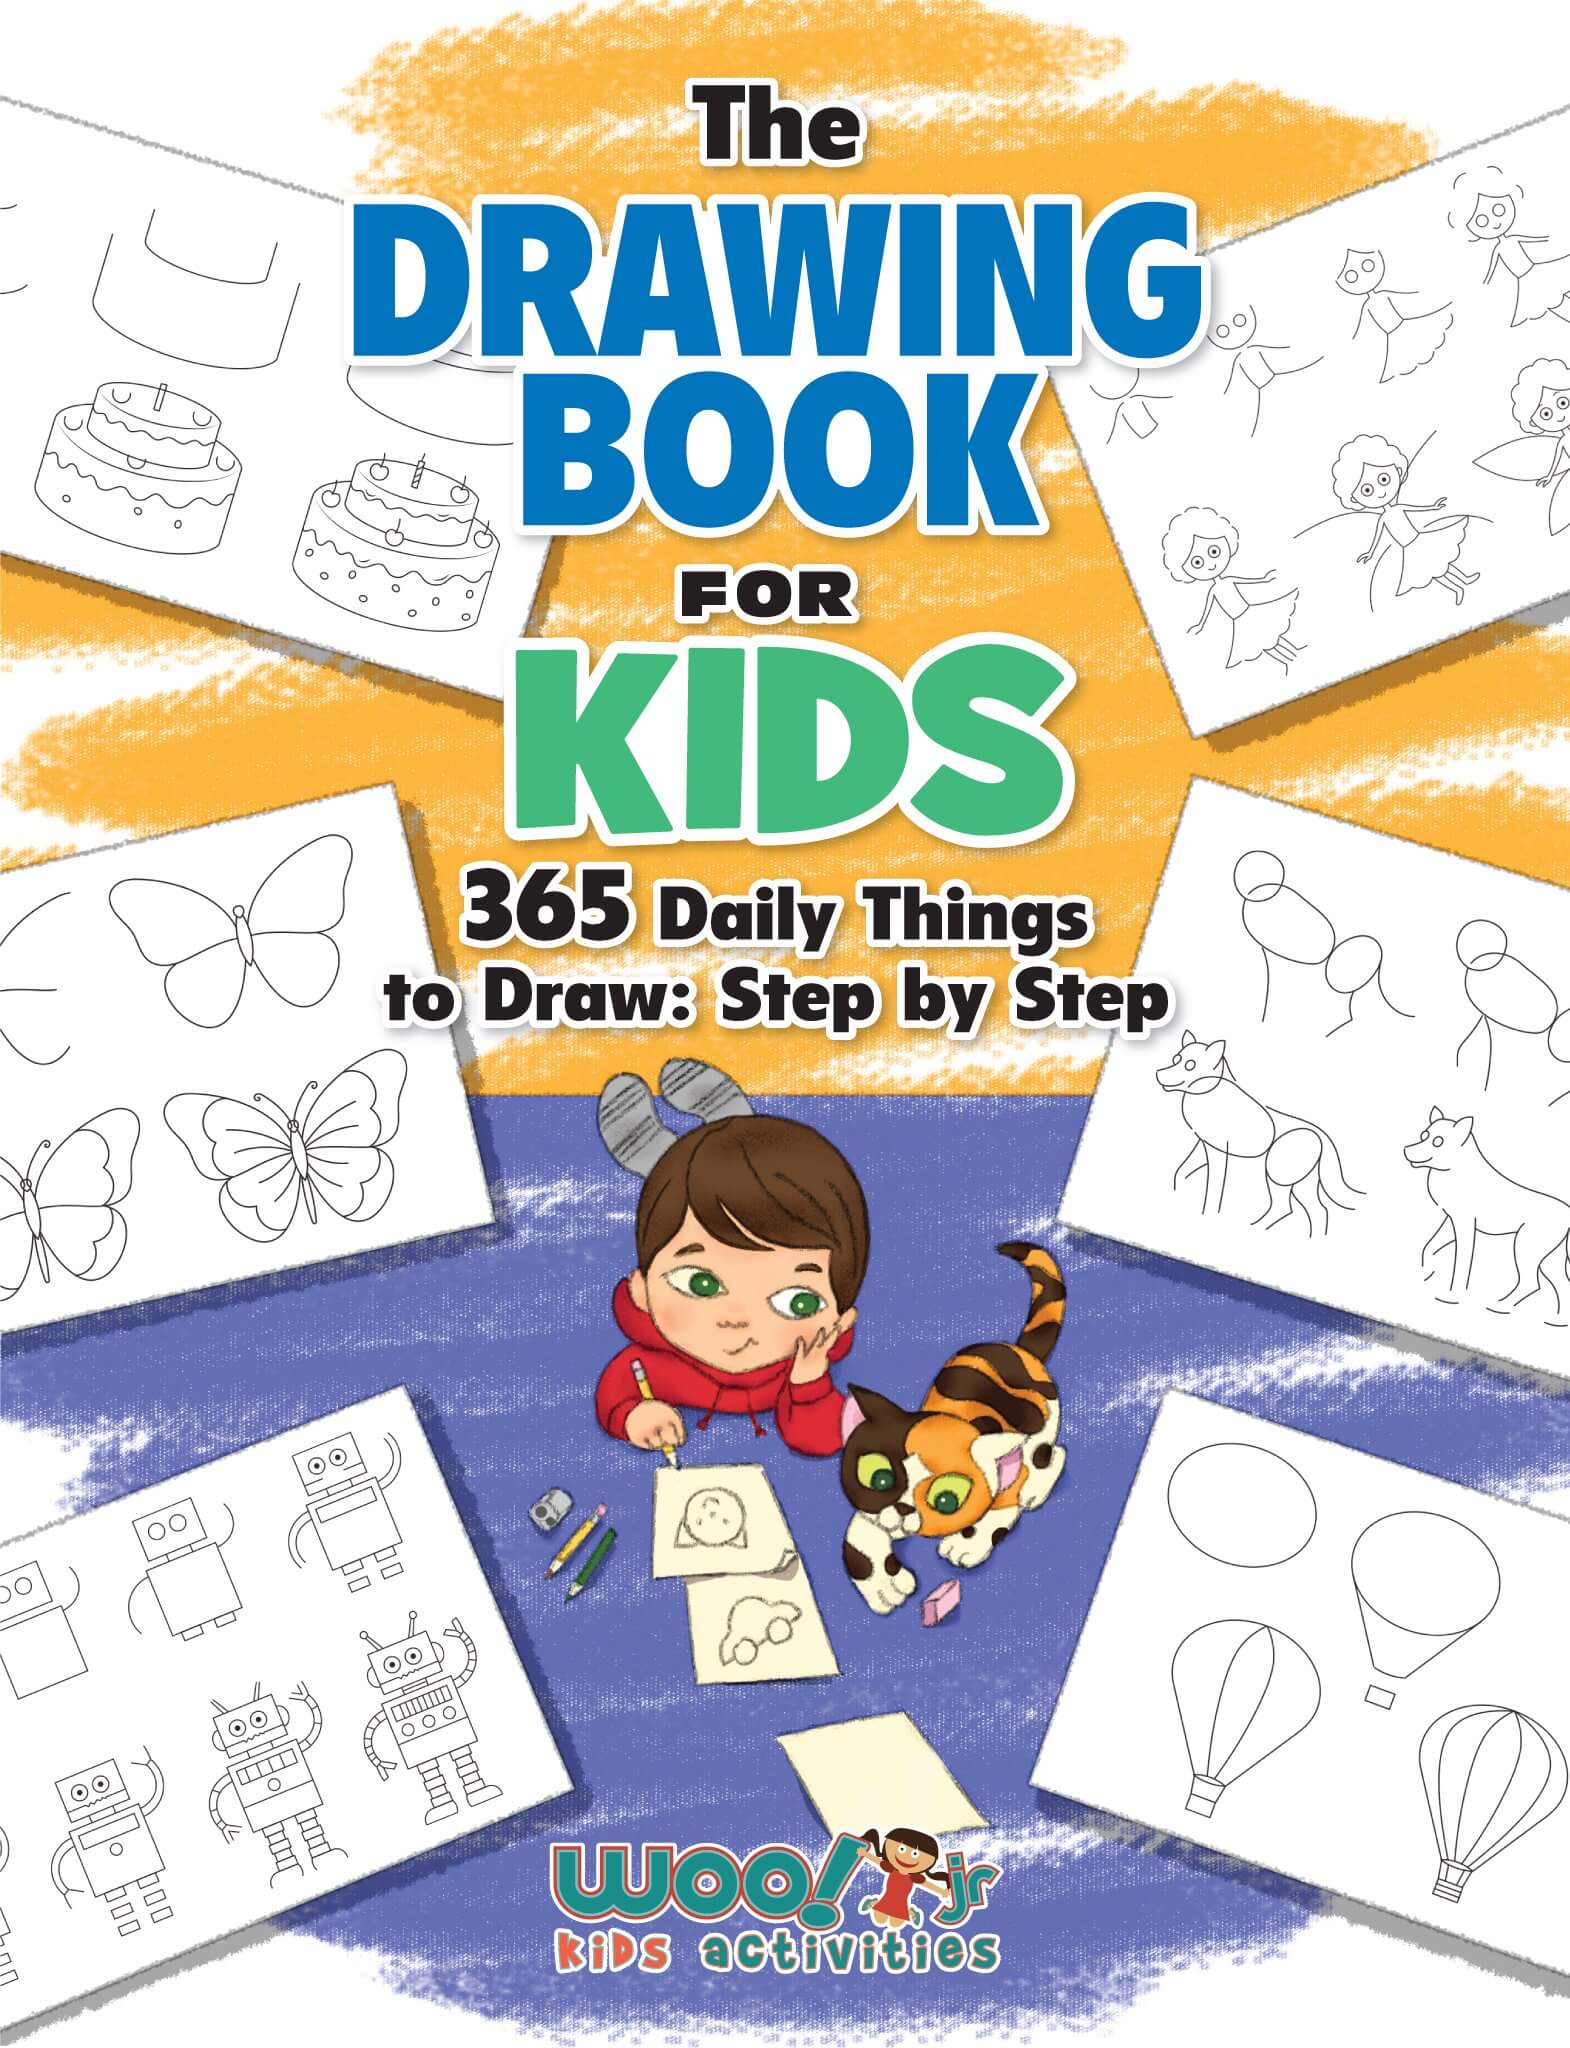 How to Draw Cool Stuff: Step by Step Activity Book, Learn How Draw Cool Stuff, Fun and Easy Workbook for Kids [Book]